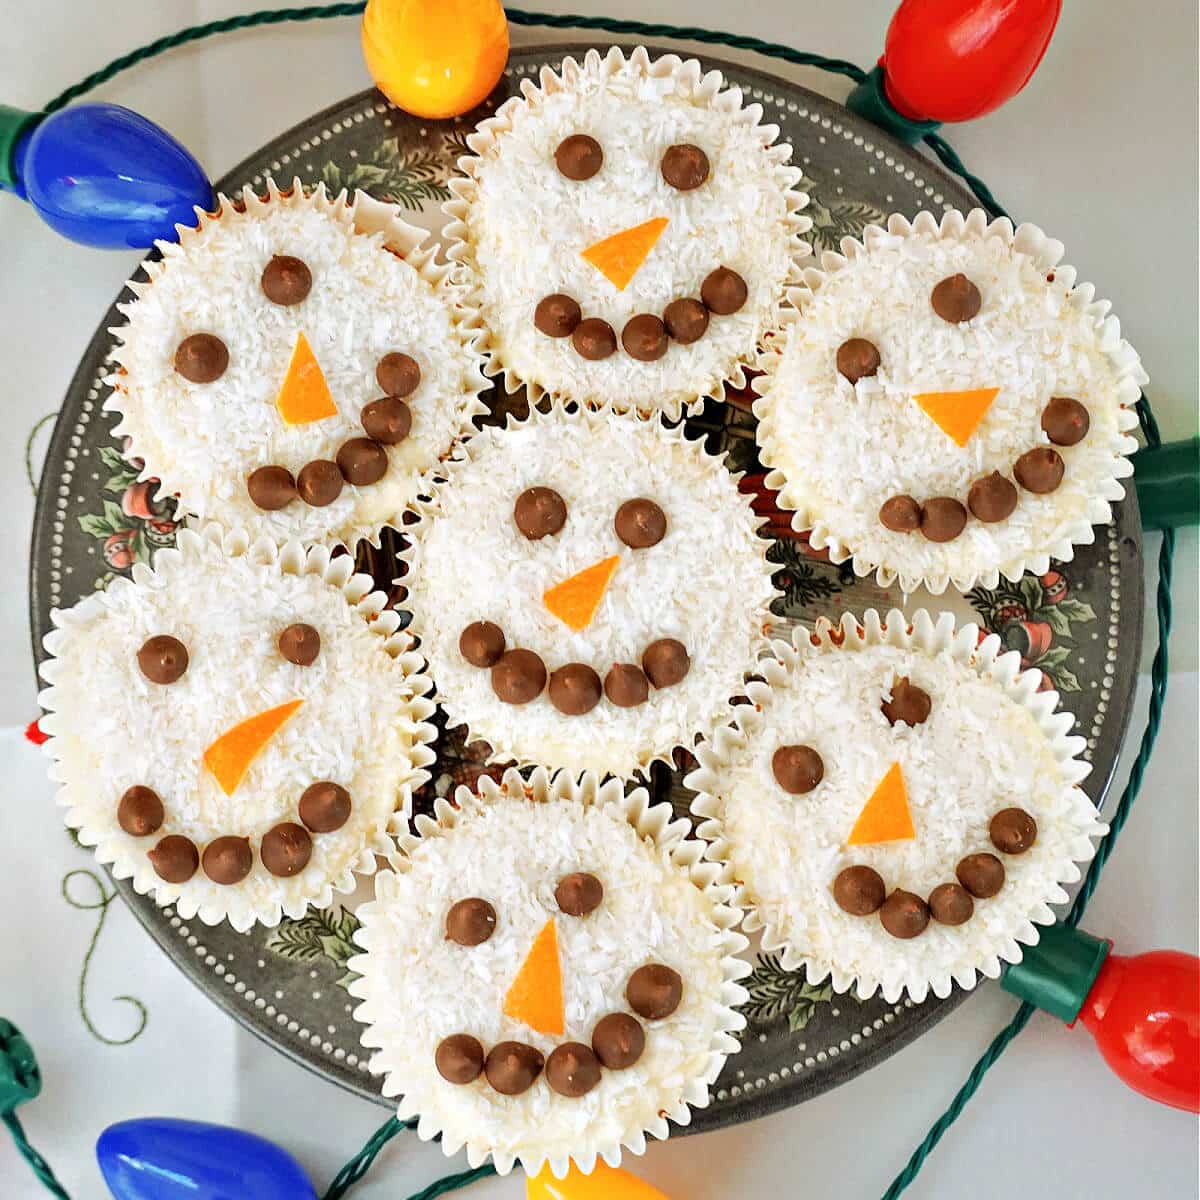 Overhead shoot of a plate with 7 snowman cupcakes